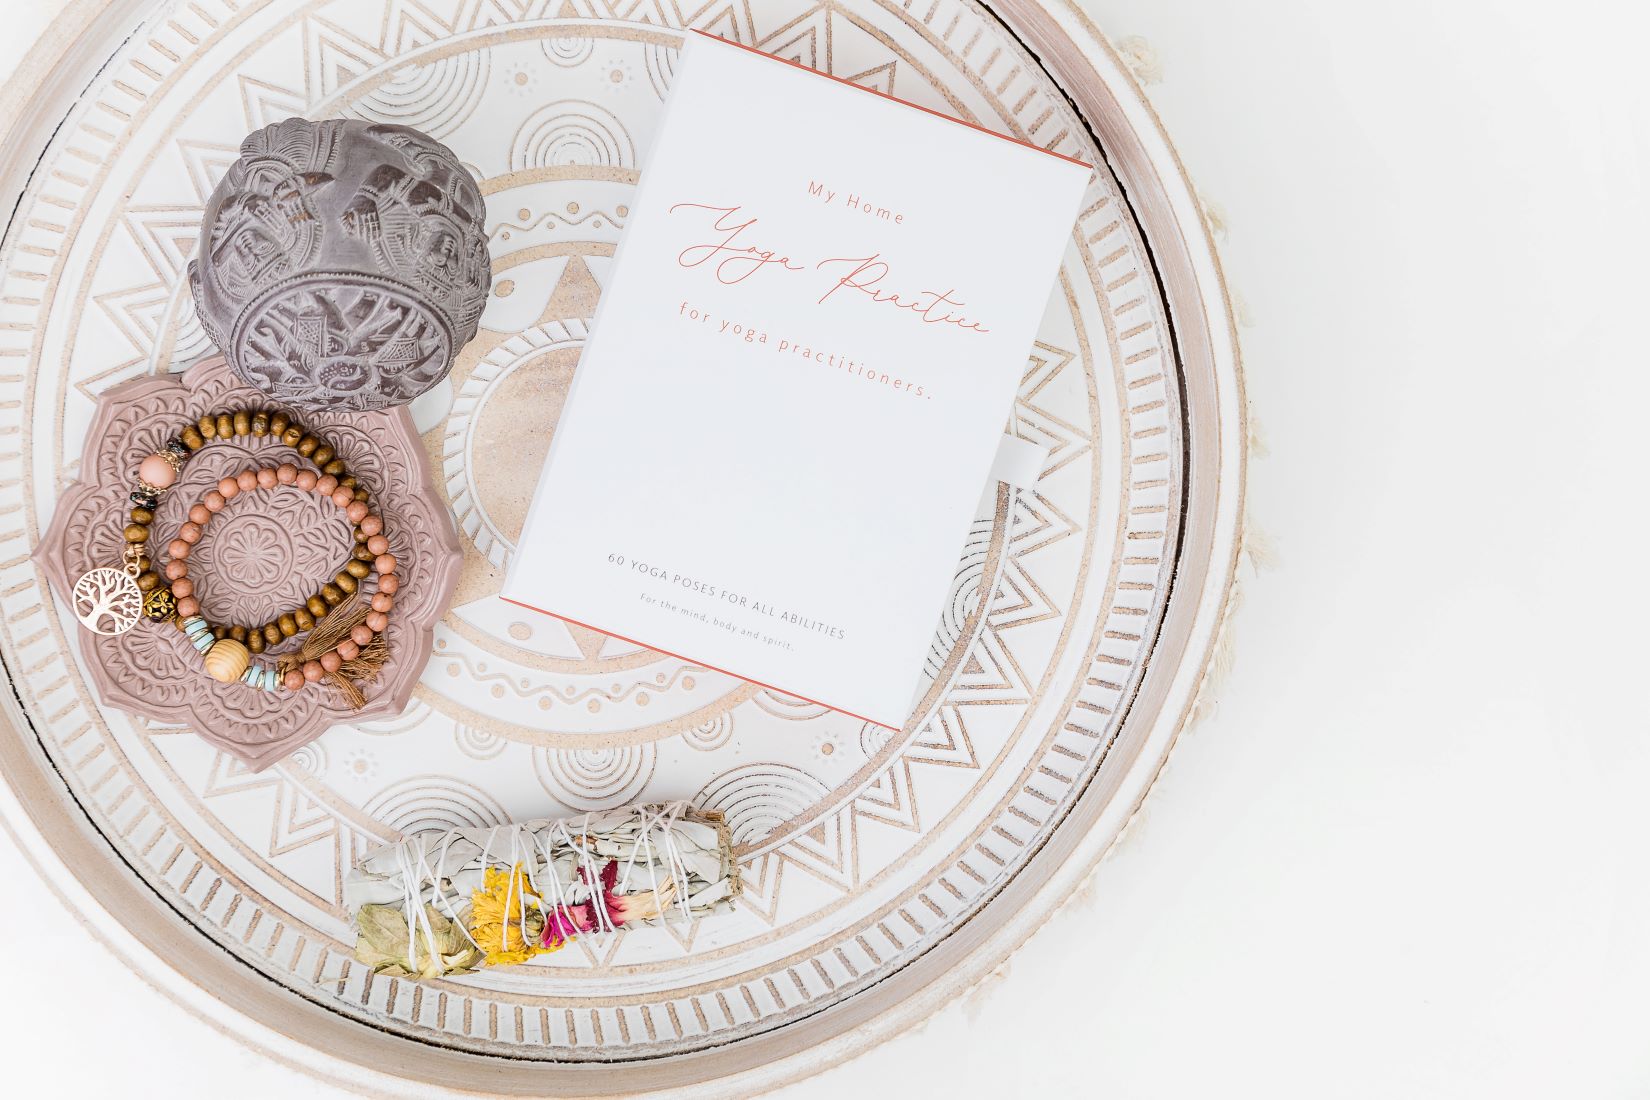 Yoga card deck on ethnic tray with malas and smudge stick made with dried flowers